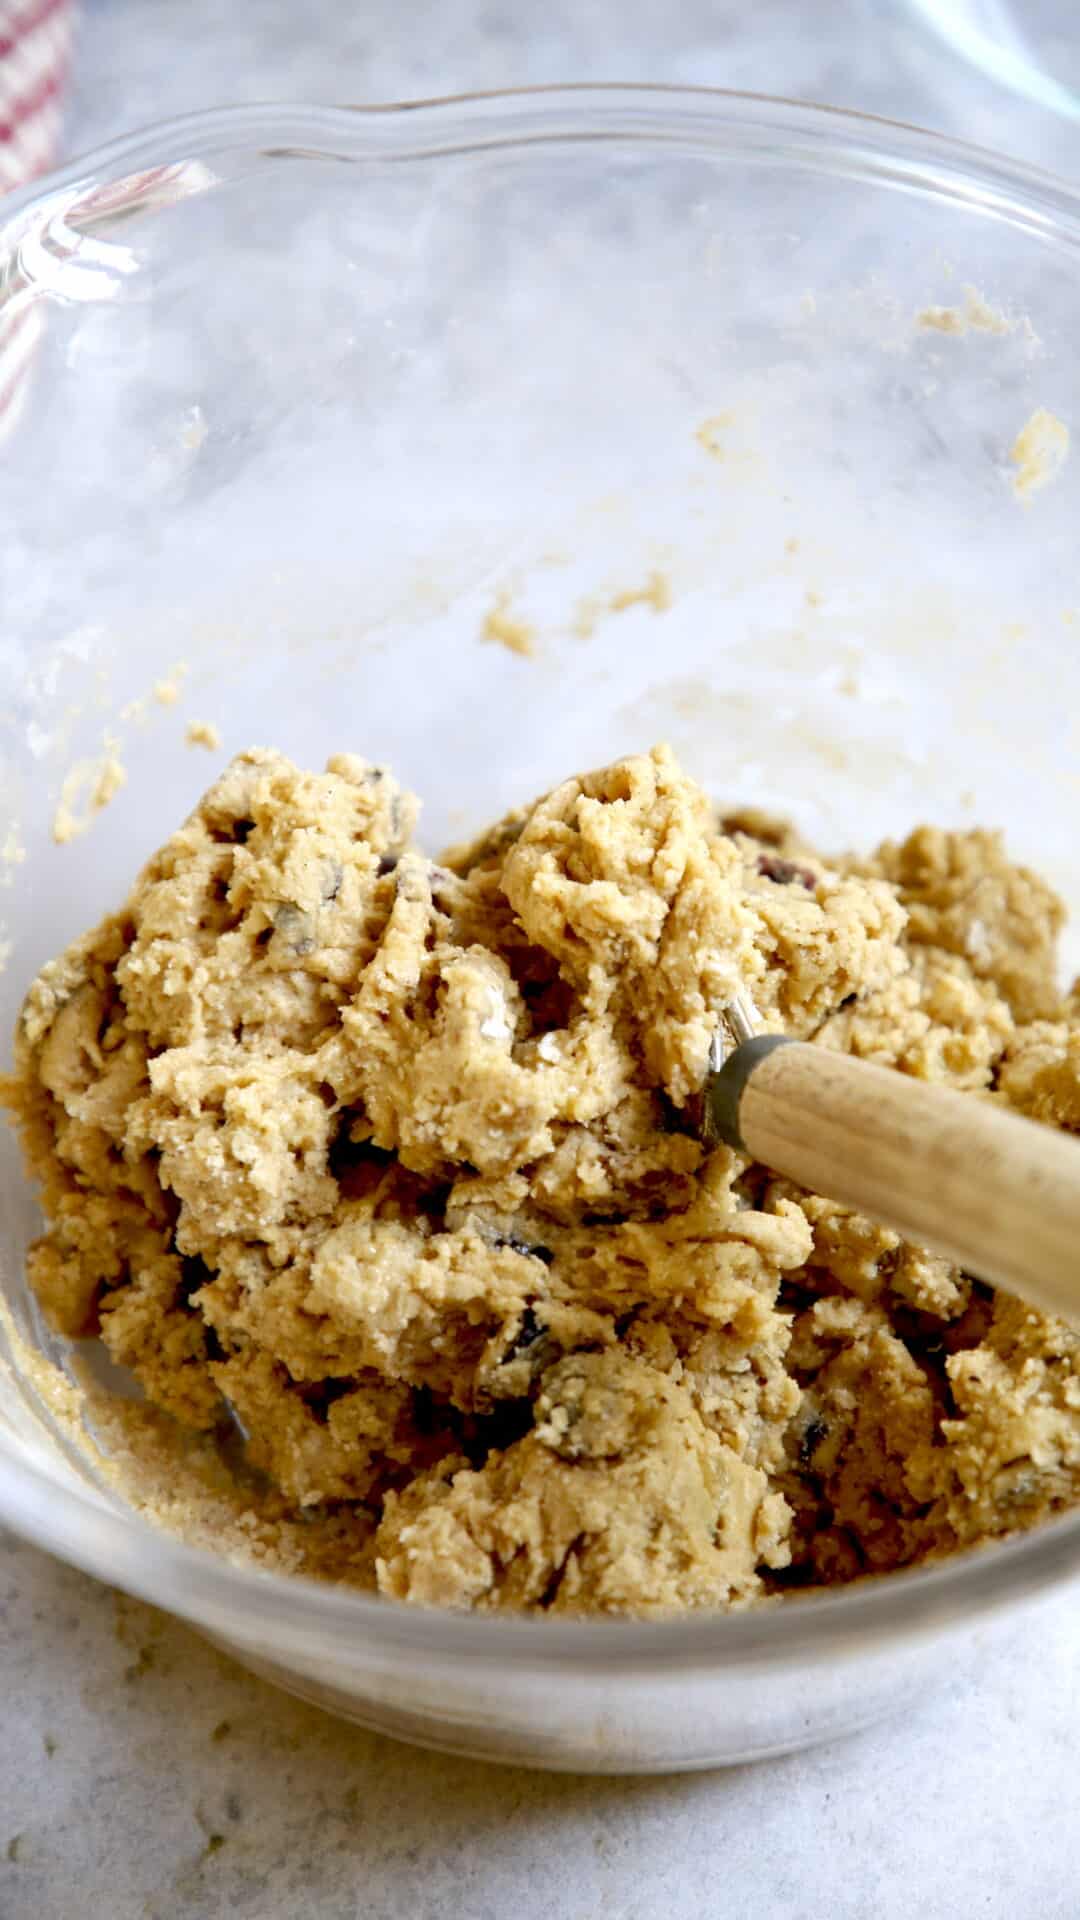 Cookie dough formed in a glass bowl with a danish dough whisk in it